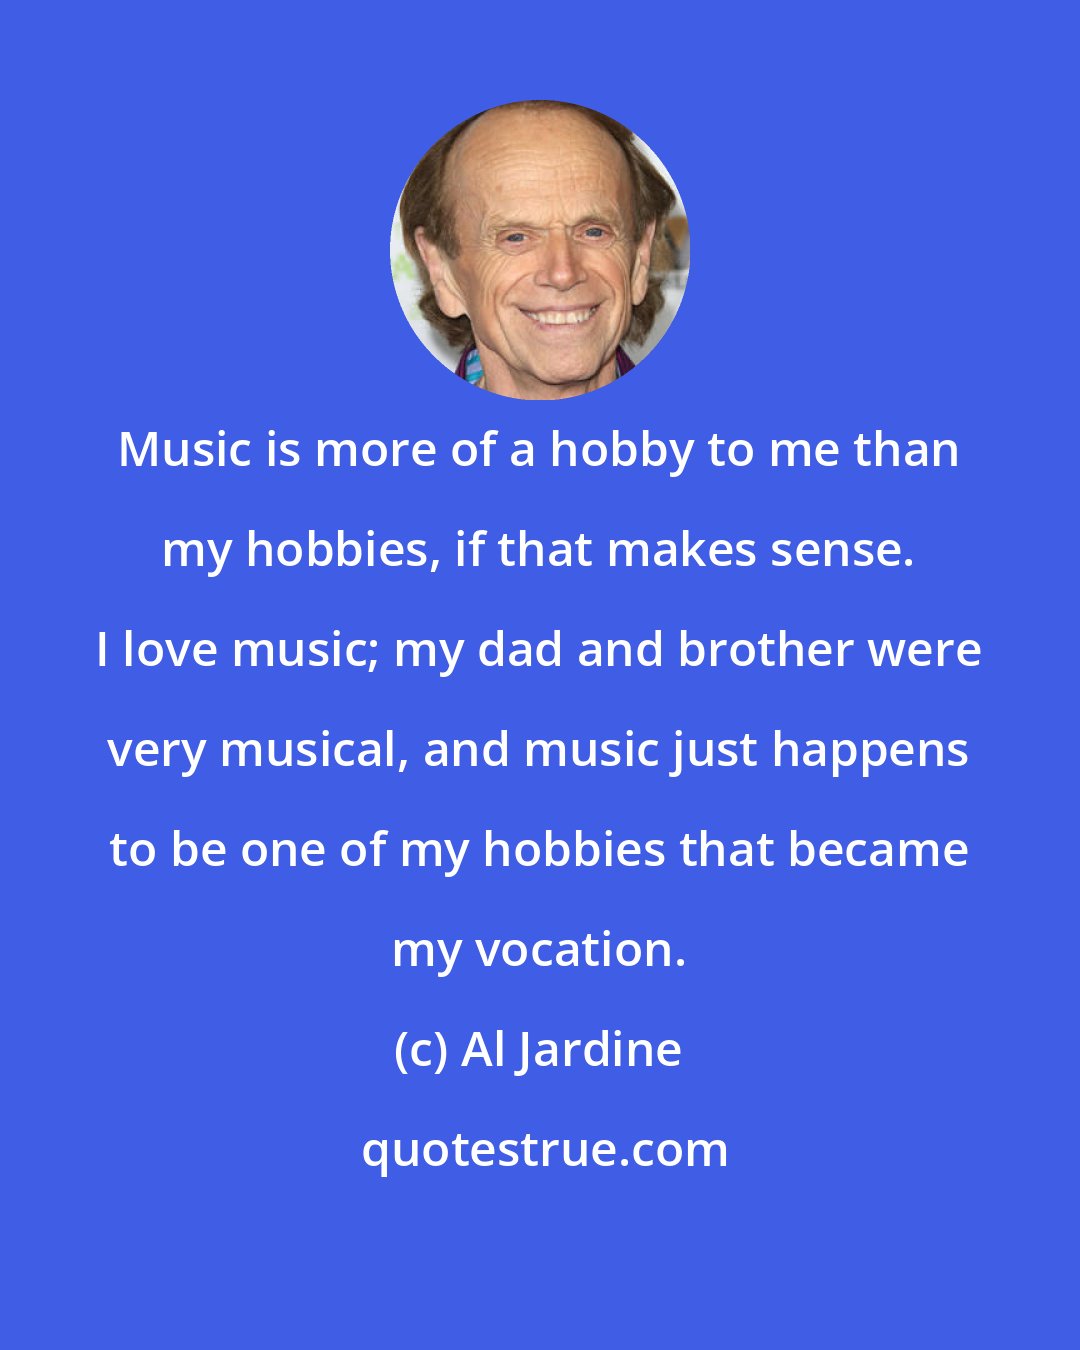 Al Jardine: Music is more of a hobby to me than my hobbies, if that makes sense. I love music; my dad and brother were very musical, and music just happens to be one of my hobbies that became my vocation.